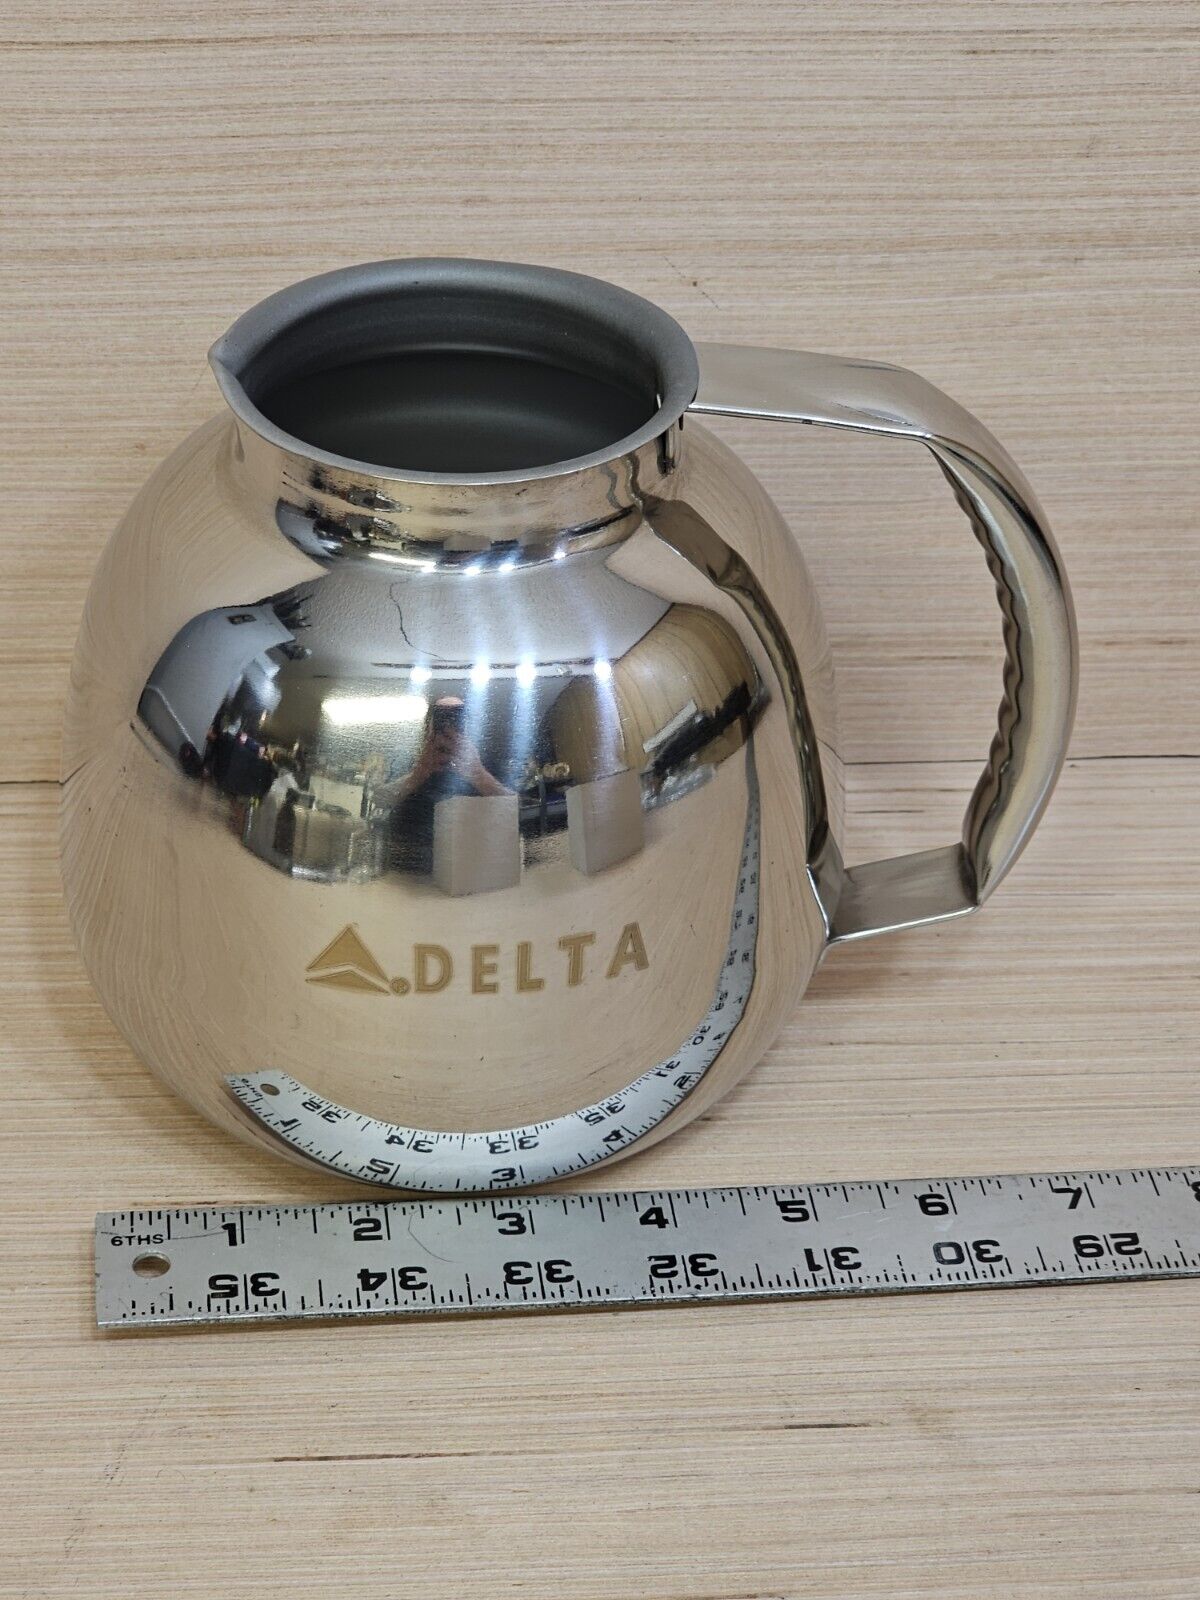 Coffee Pot from Delta Airlines CNBMIT 18.8 Stainless Steel 7/10/2021 NEW